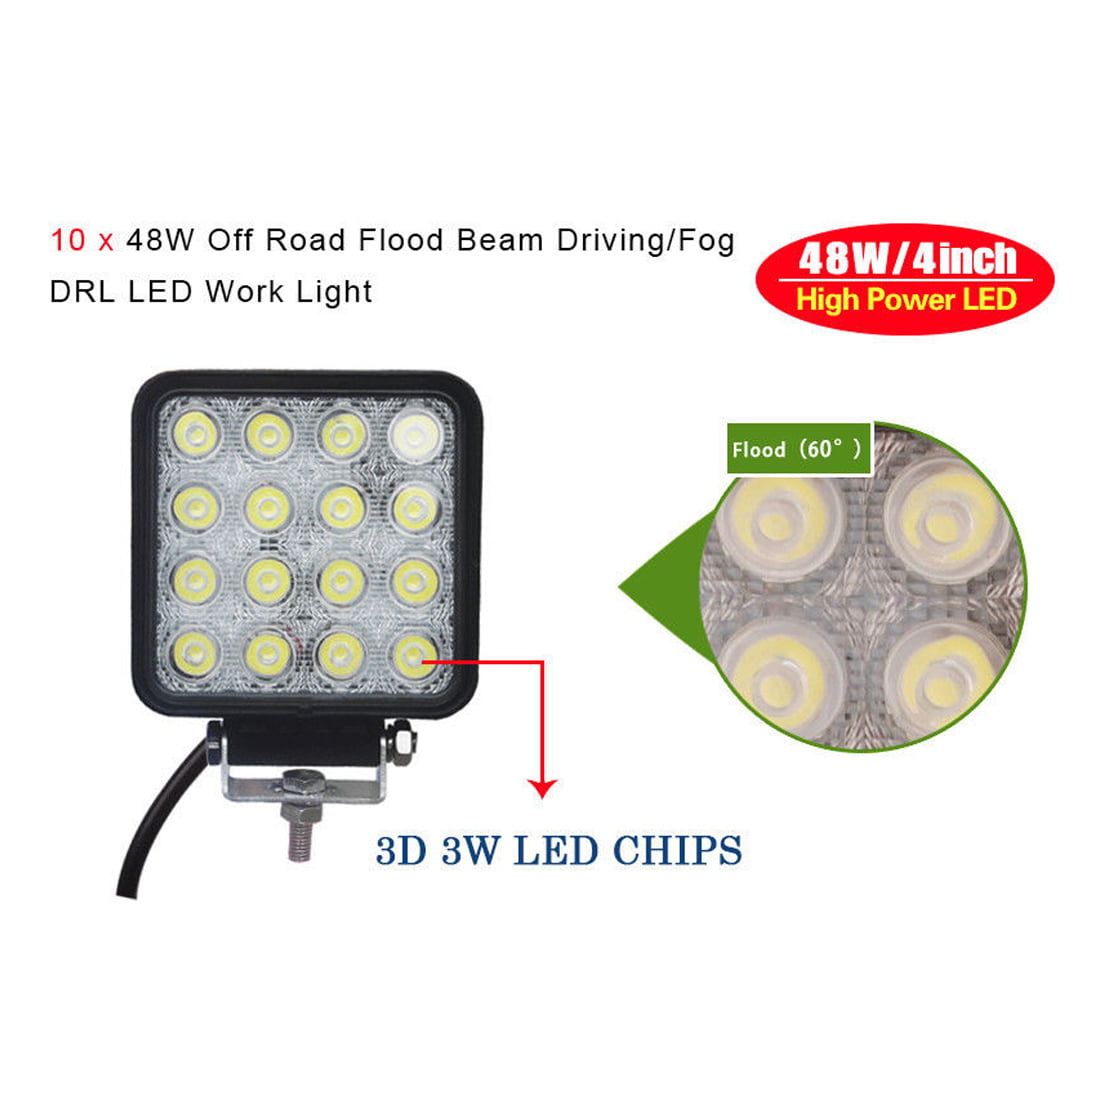 10X 48W 4inch Square Offroad FLOOD Work LED Light Fog Driving DRL SUV 4WD Truck